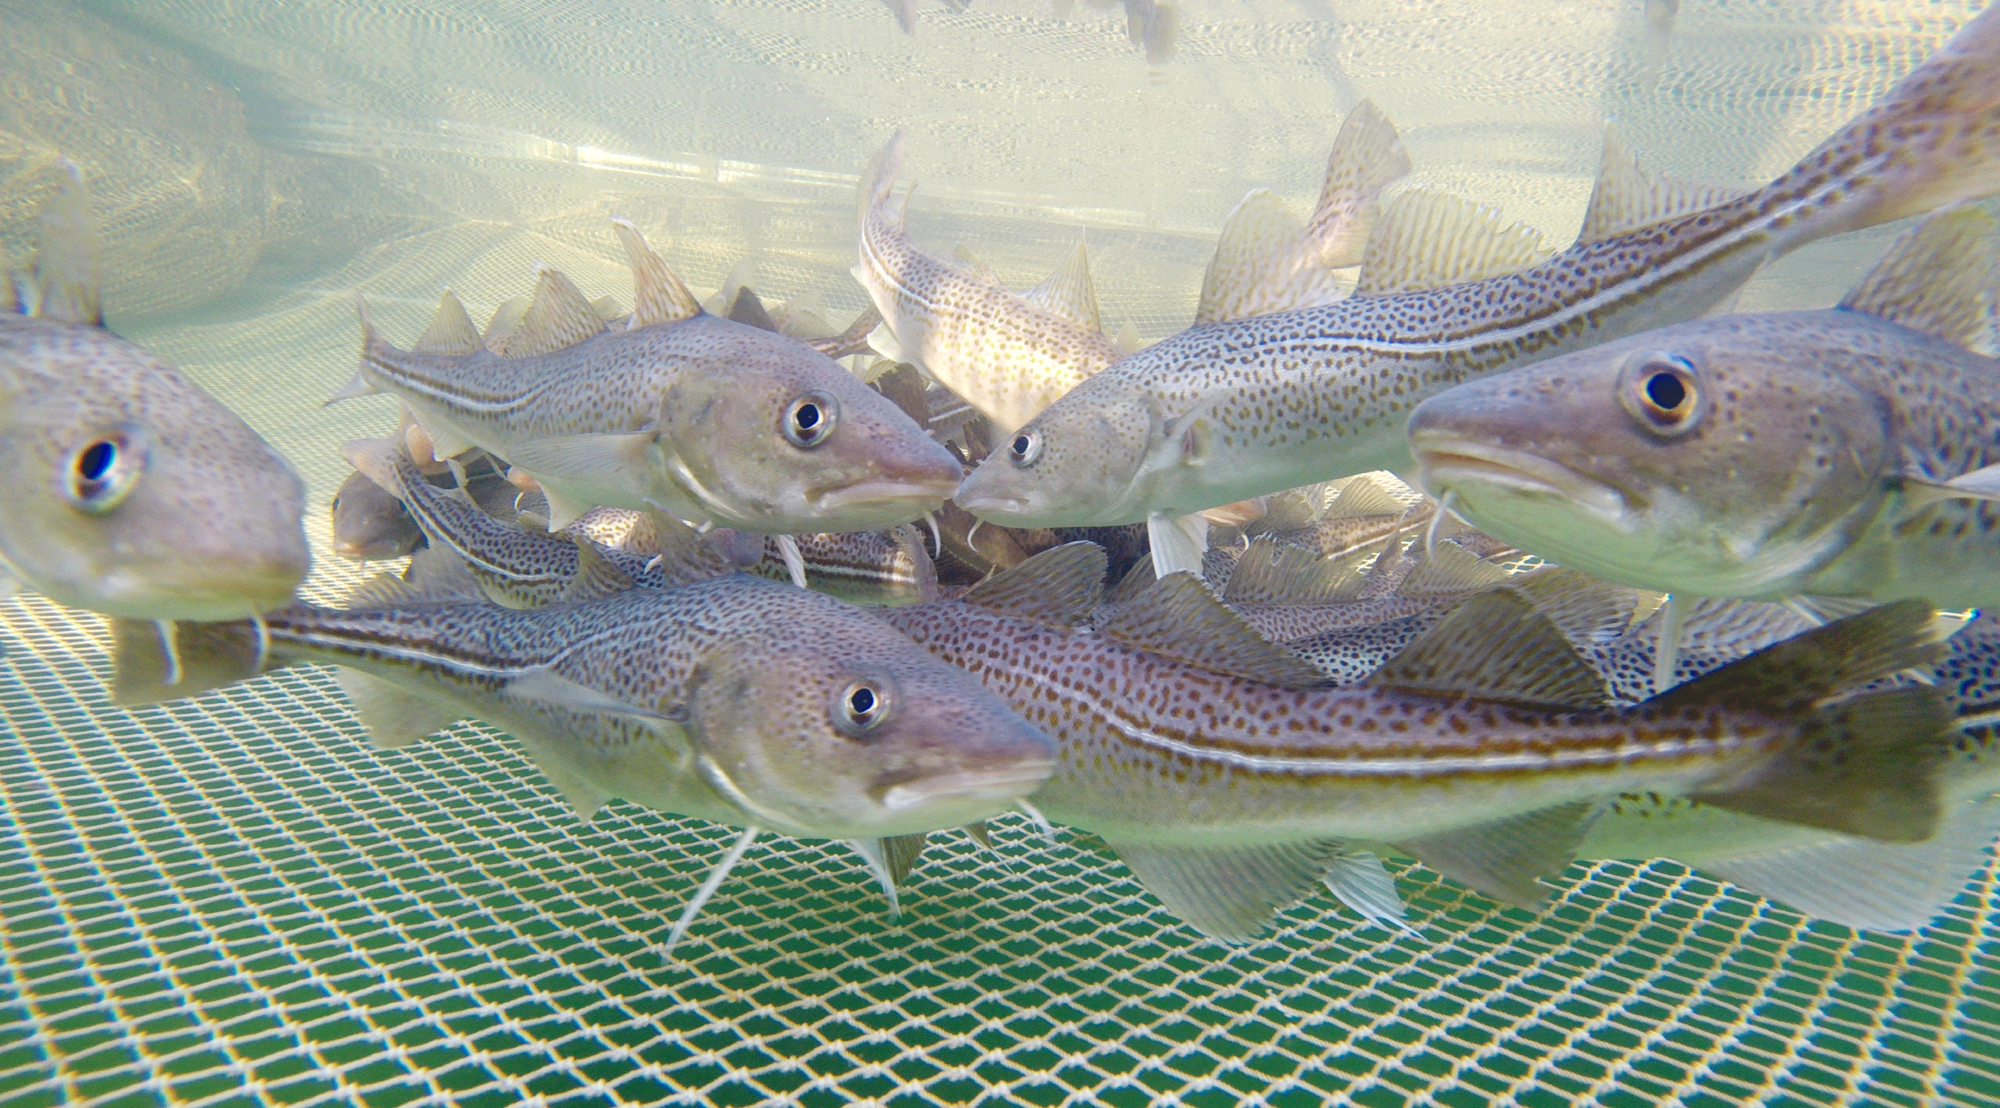 Young cod swim close together in the net cage under the water surface.